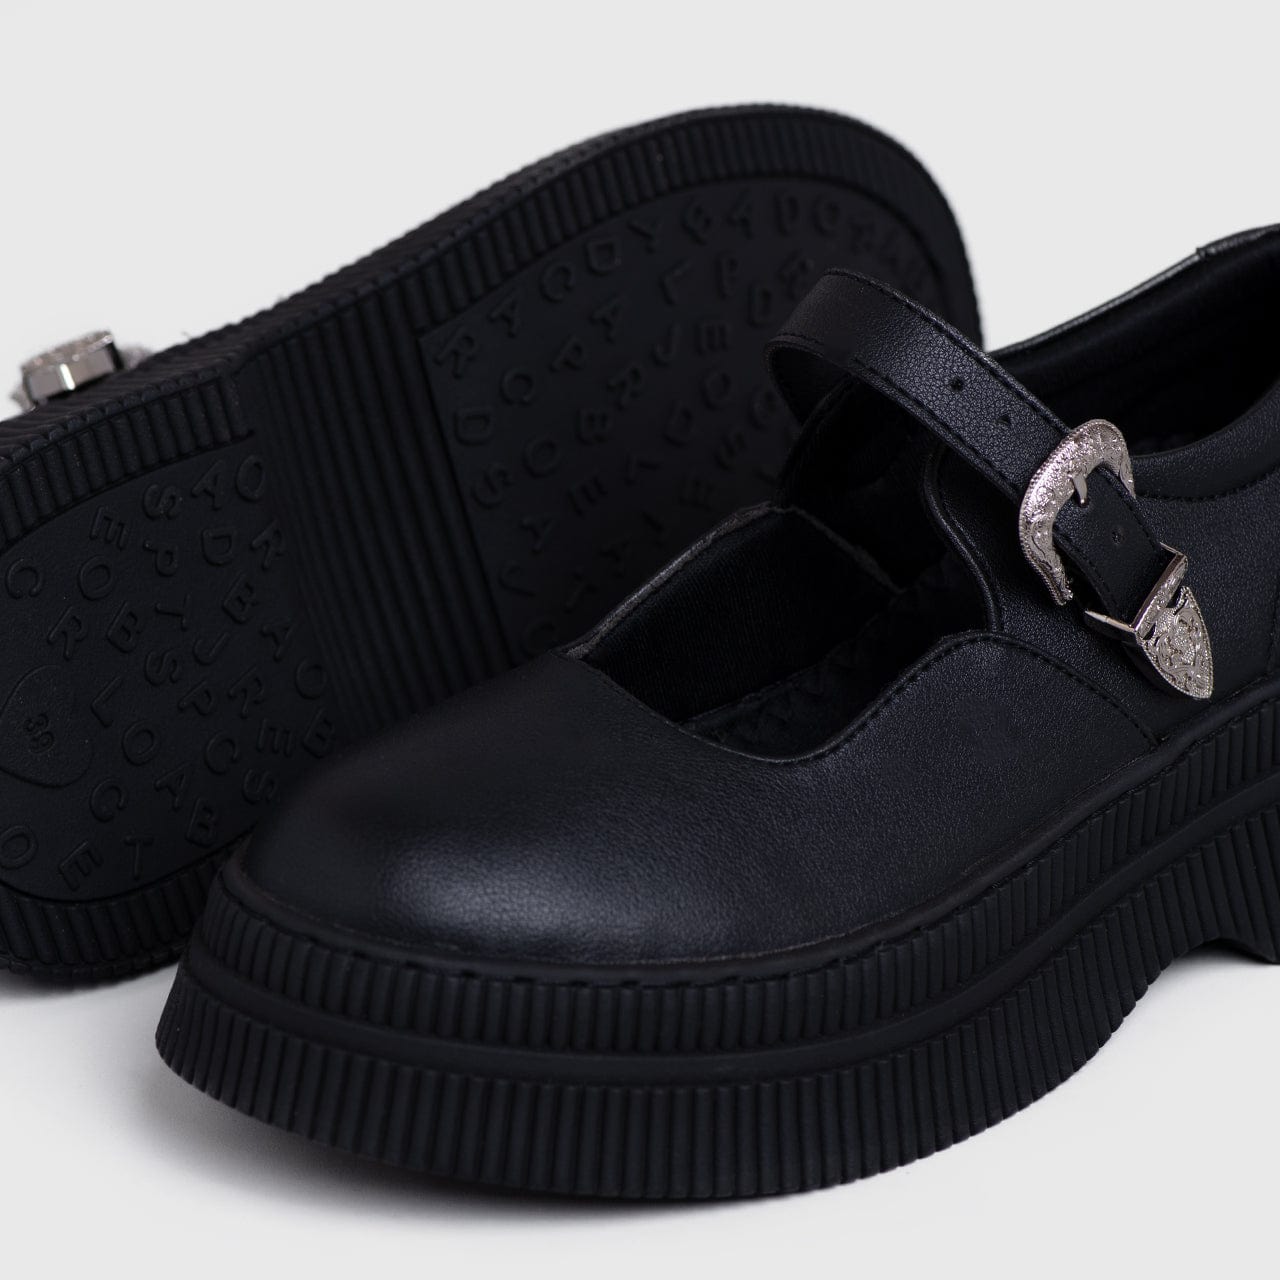 Adorable Projects Official Adorableprojects - Nicia Platform Black - Mary Jane